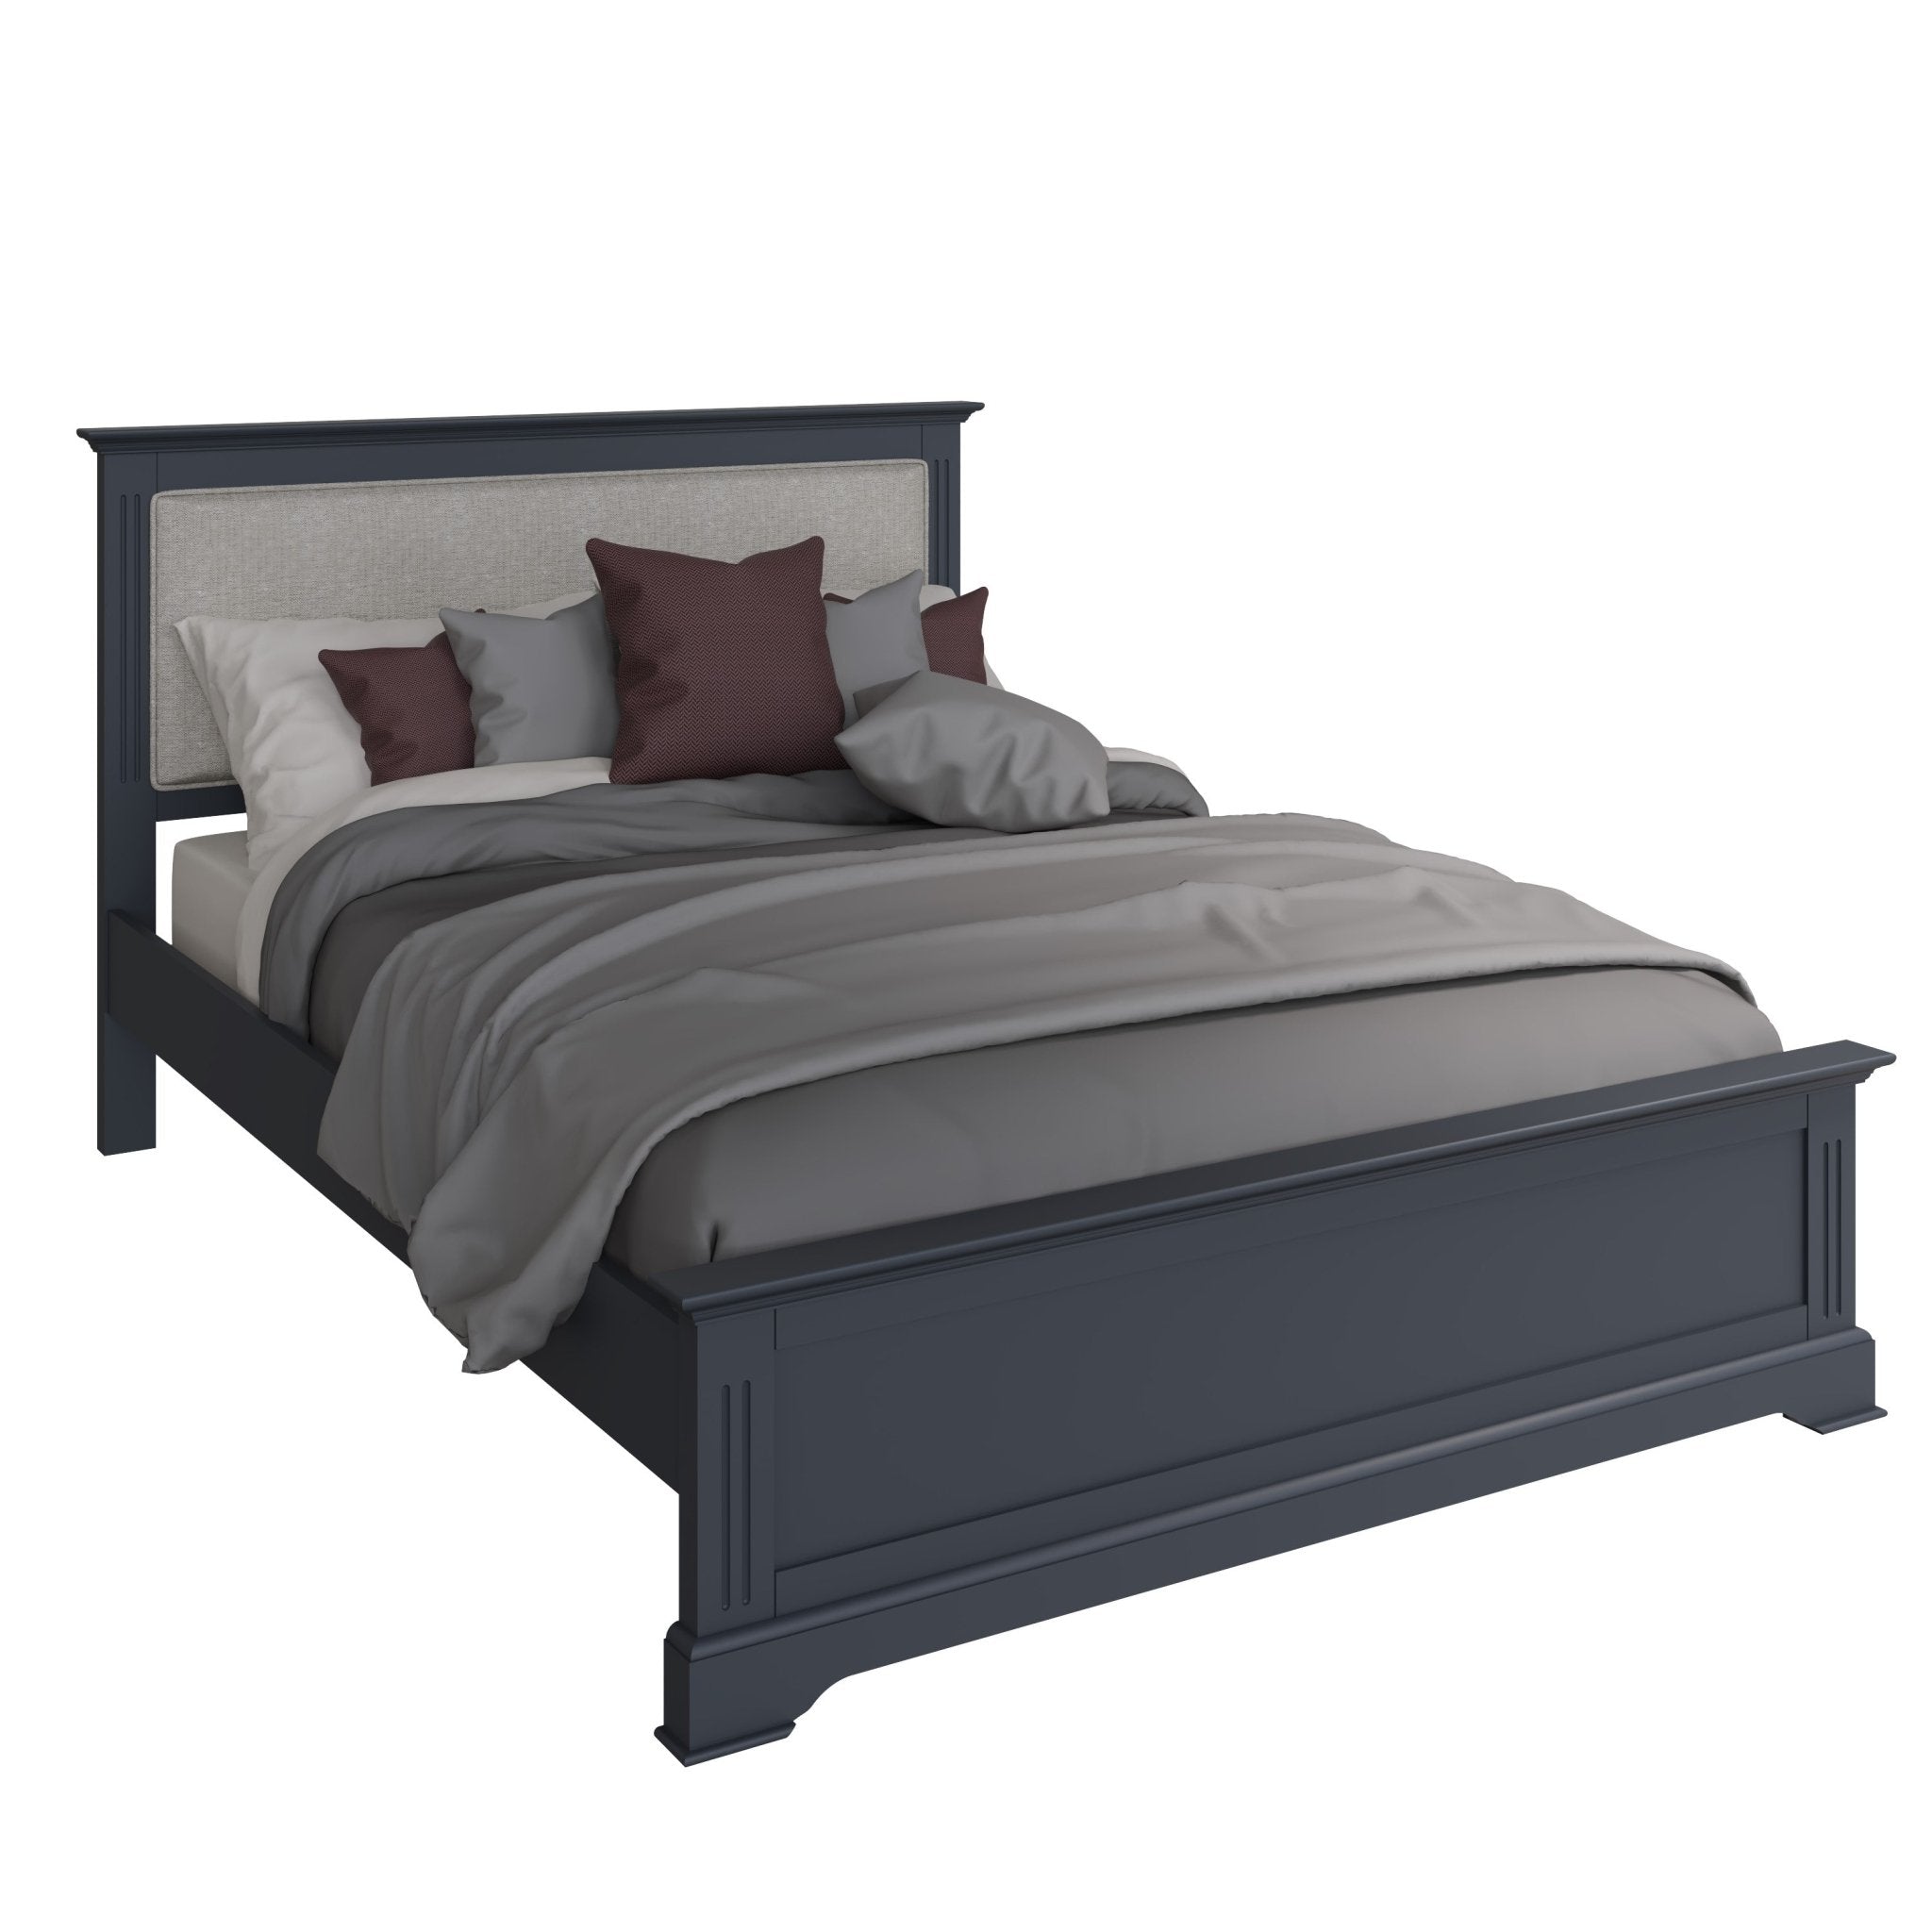 Henley Midnight Grey Double Bed Frame 4'6'' - Duck Barn Interiors